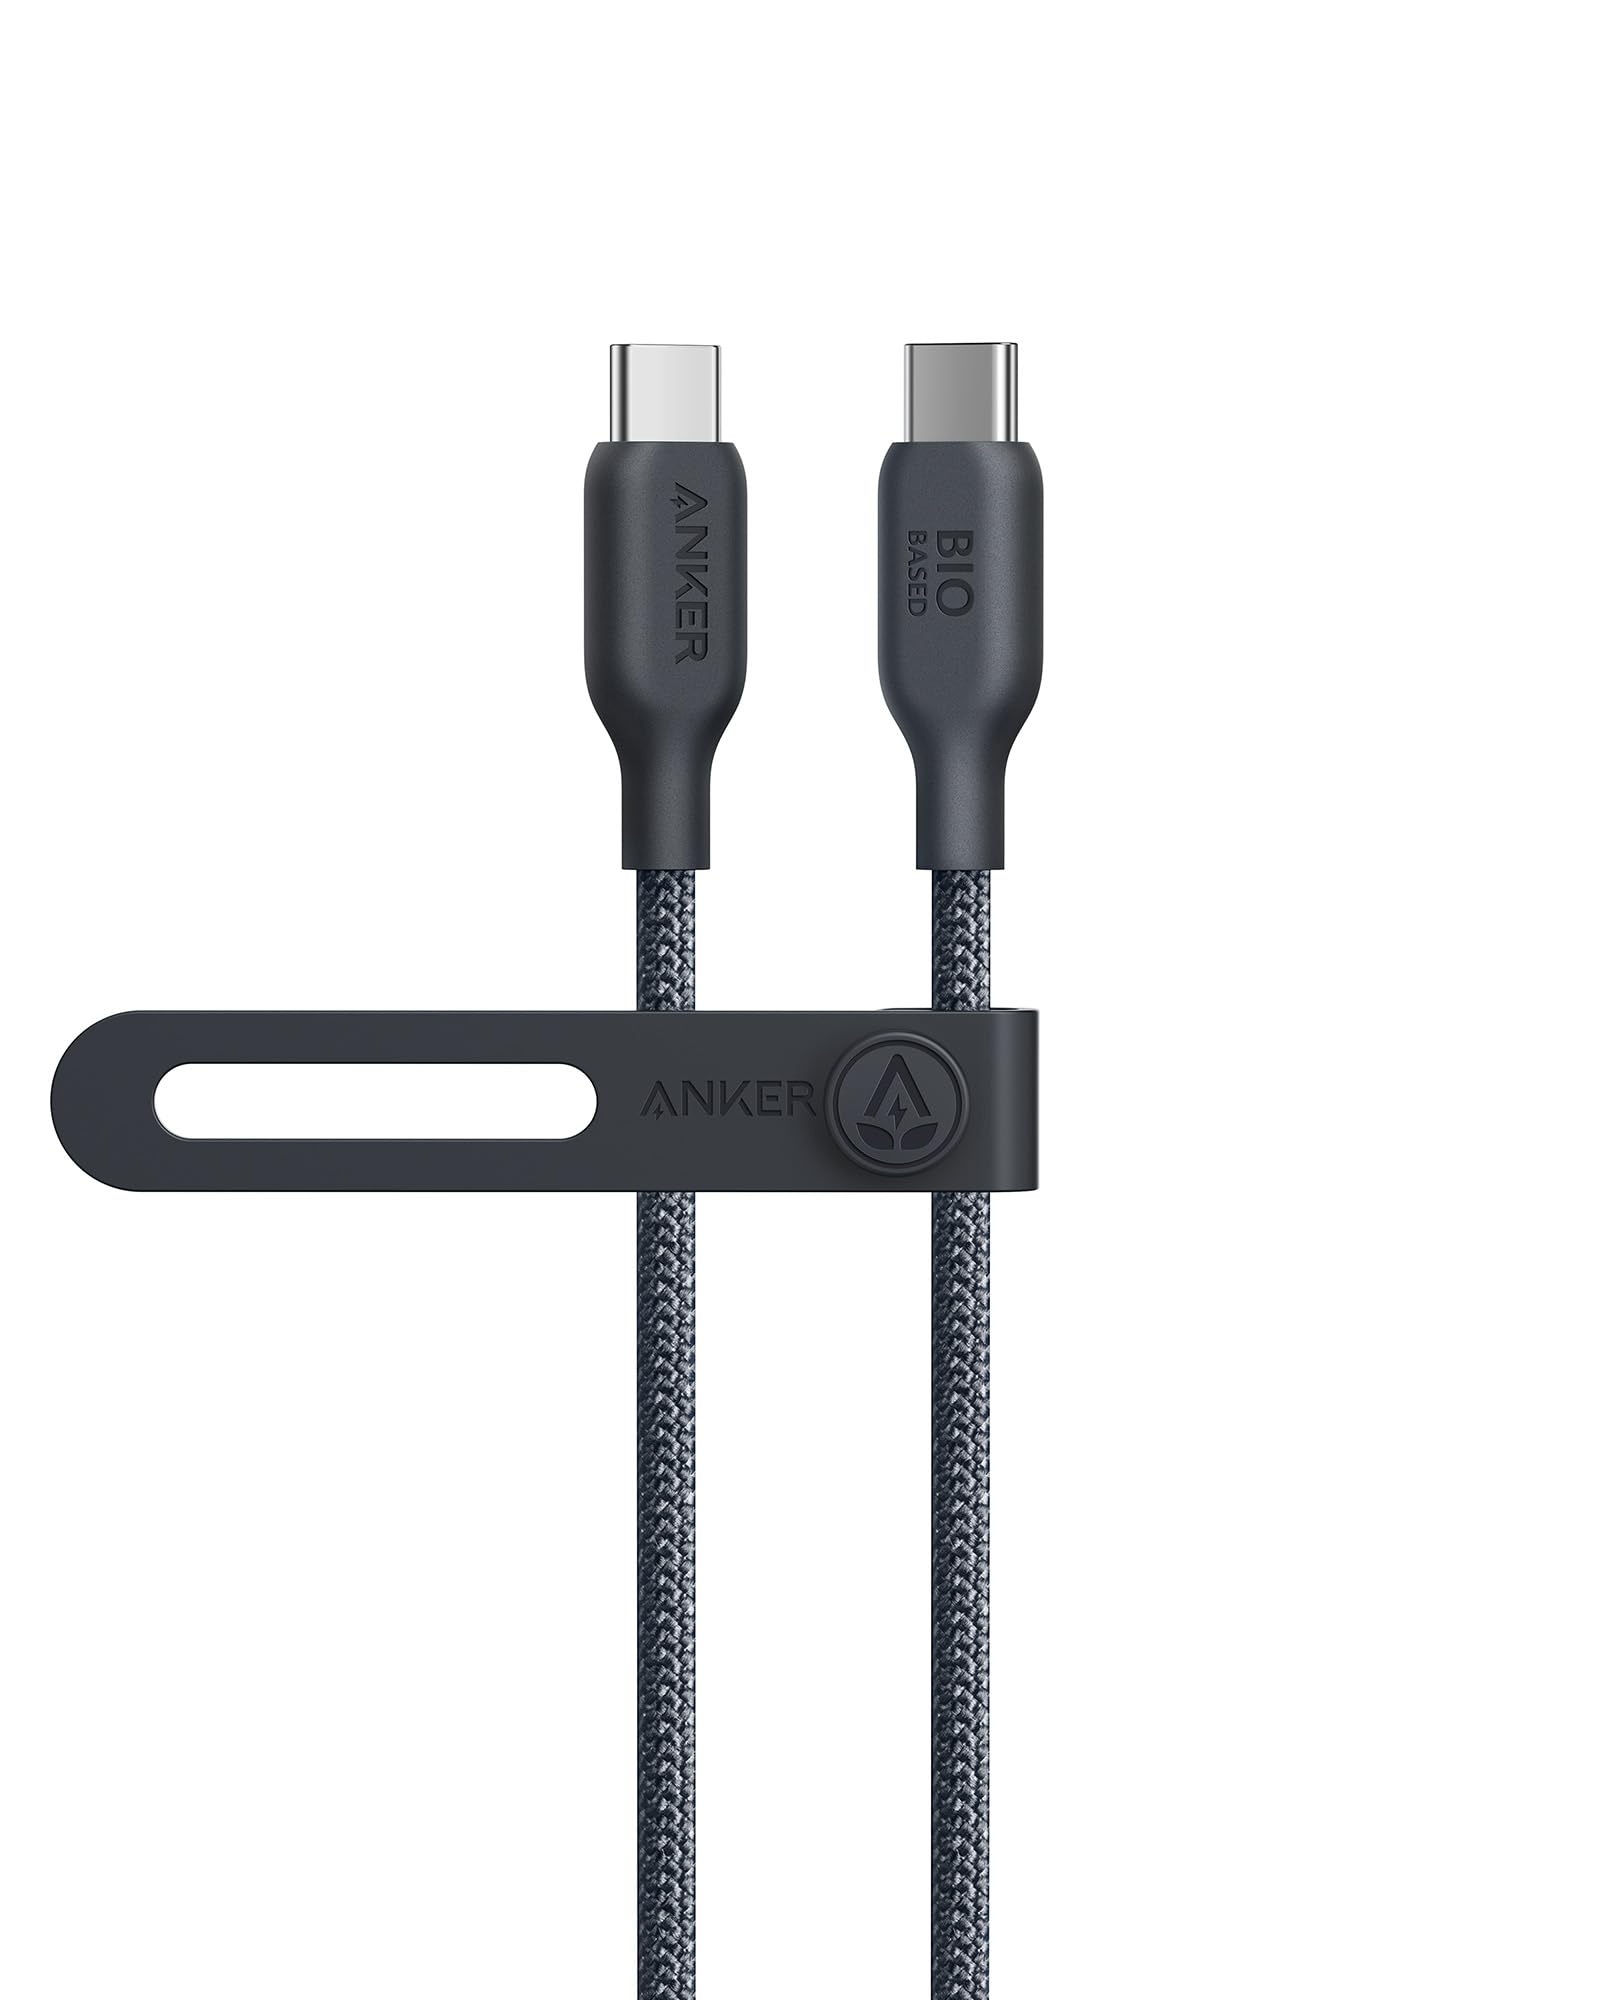  Anker Cable Management, Magnetic Cable Holder, Desktop  Multipurpose Cord Keeper, 5 Clips for Lightning, USB C, Micro Cables, Other  Wires, Sticks to Wood, Marble, Metal, Glass (Black) : Electronics